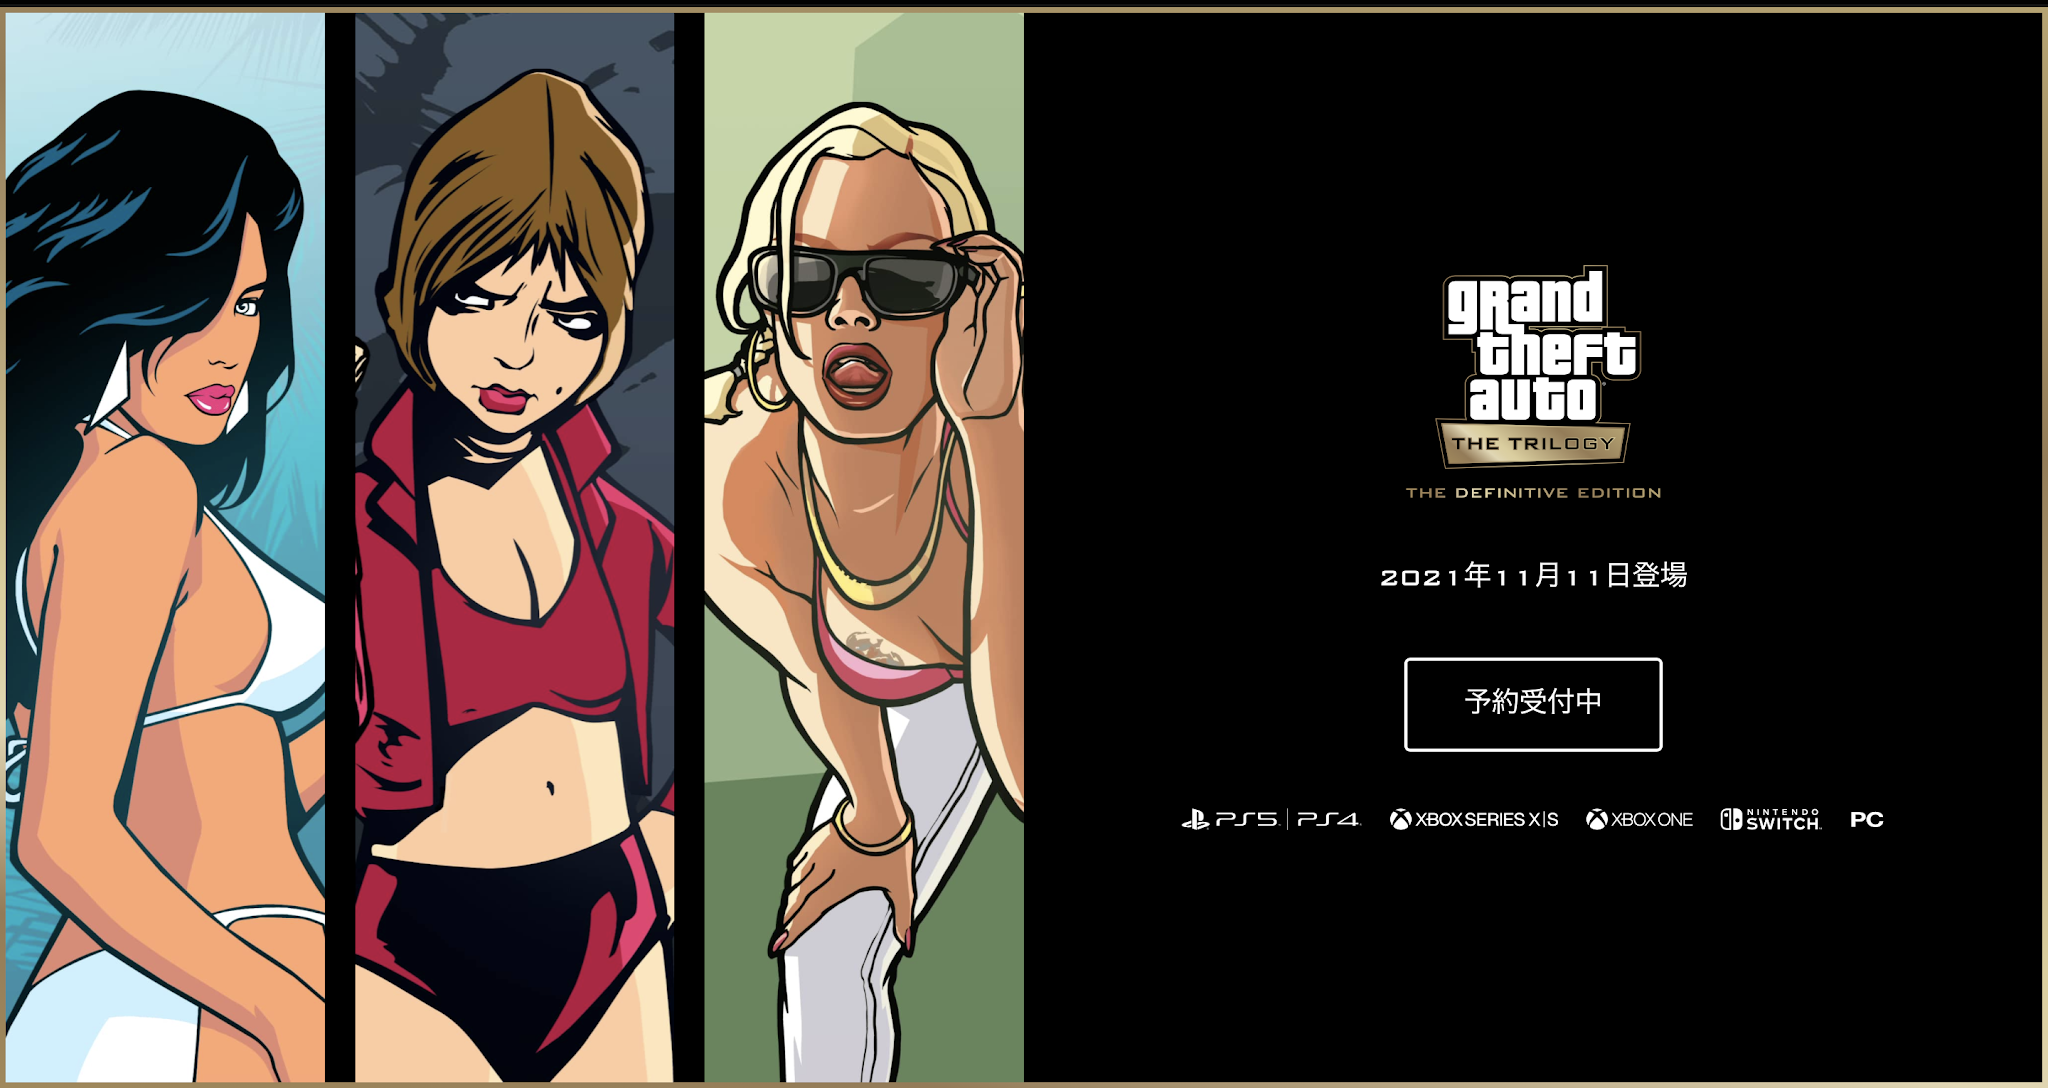 Grand Theft Auto Trilogy Dated for Japan